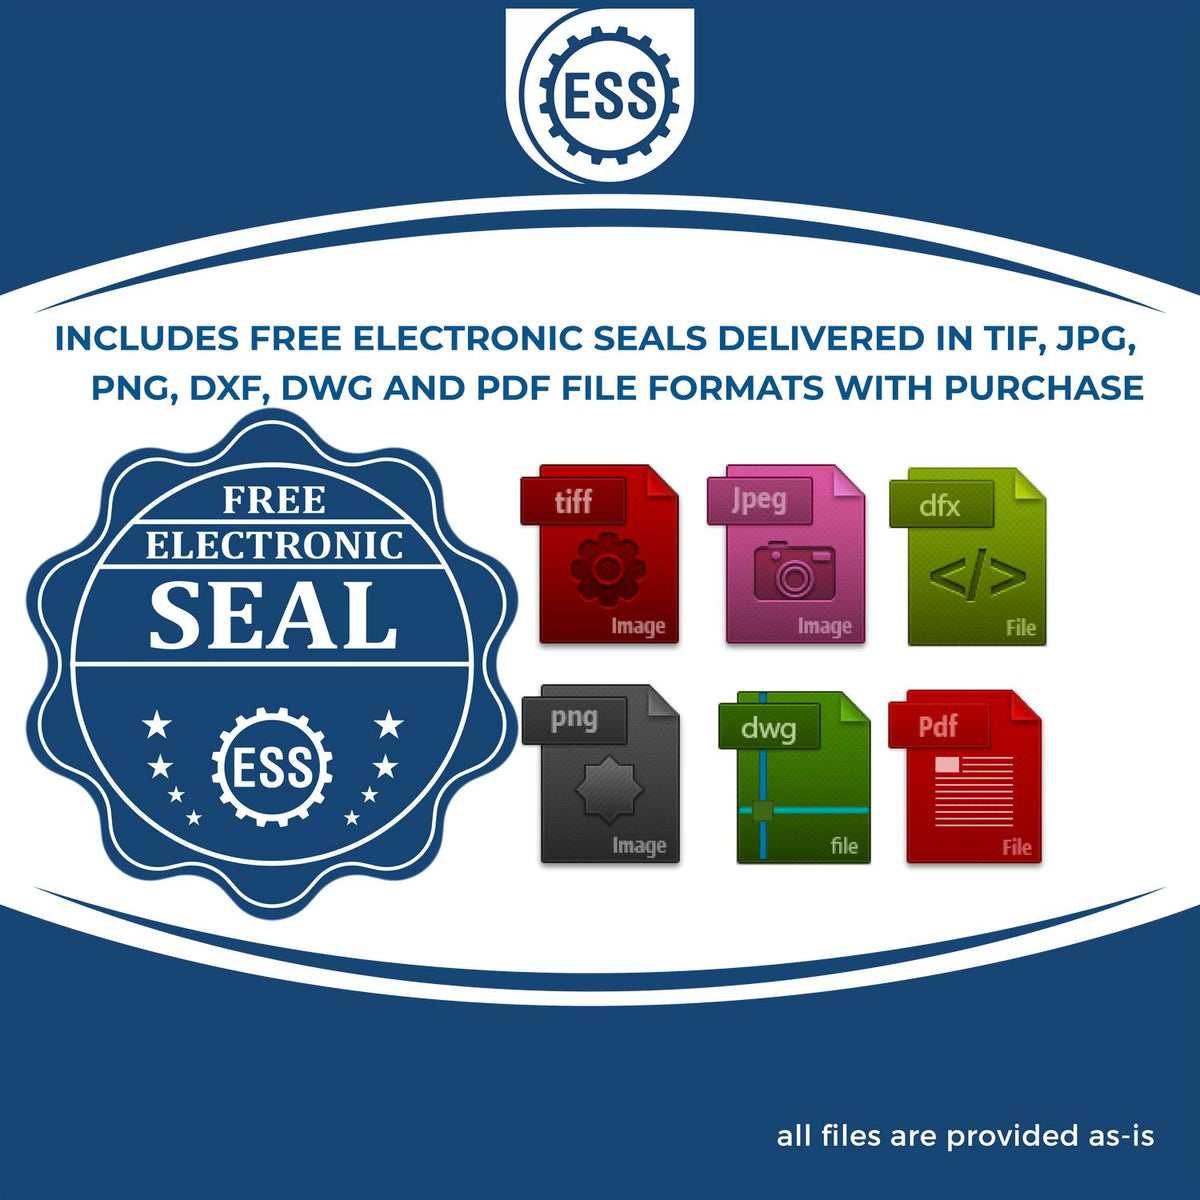 An infographic for the free electronic seal for the Heavy Duty Cast Iron South Dakota Geologist Seal Embosser illustrating the different file type icons such as DXF, DWG, TIF, JPG and PNG.